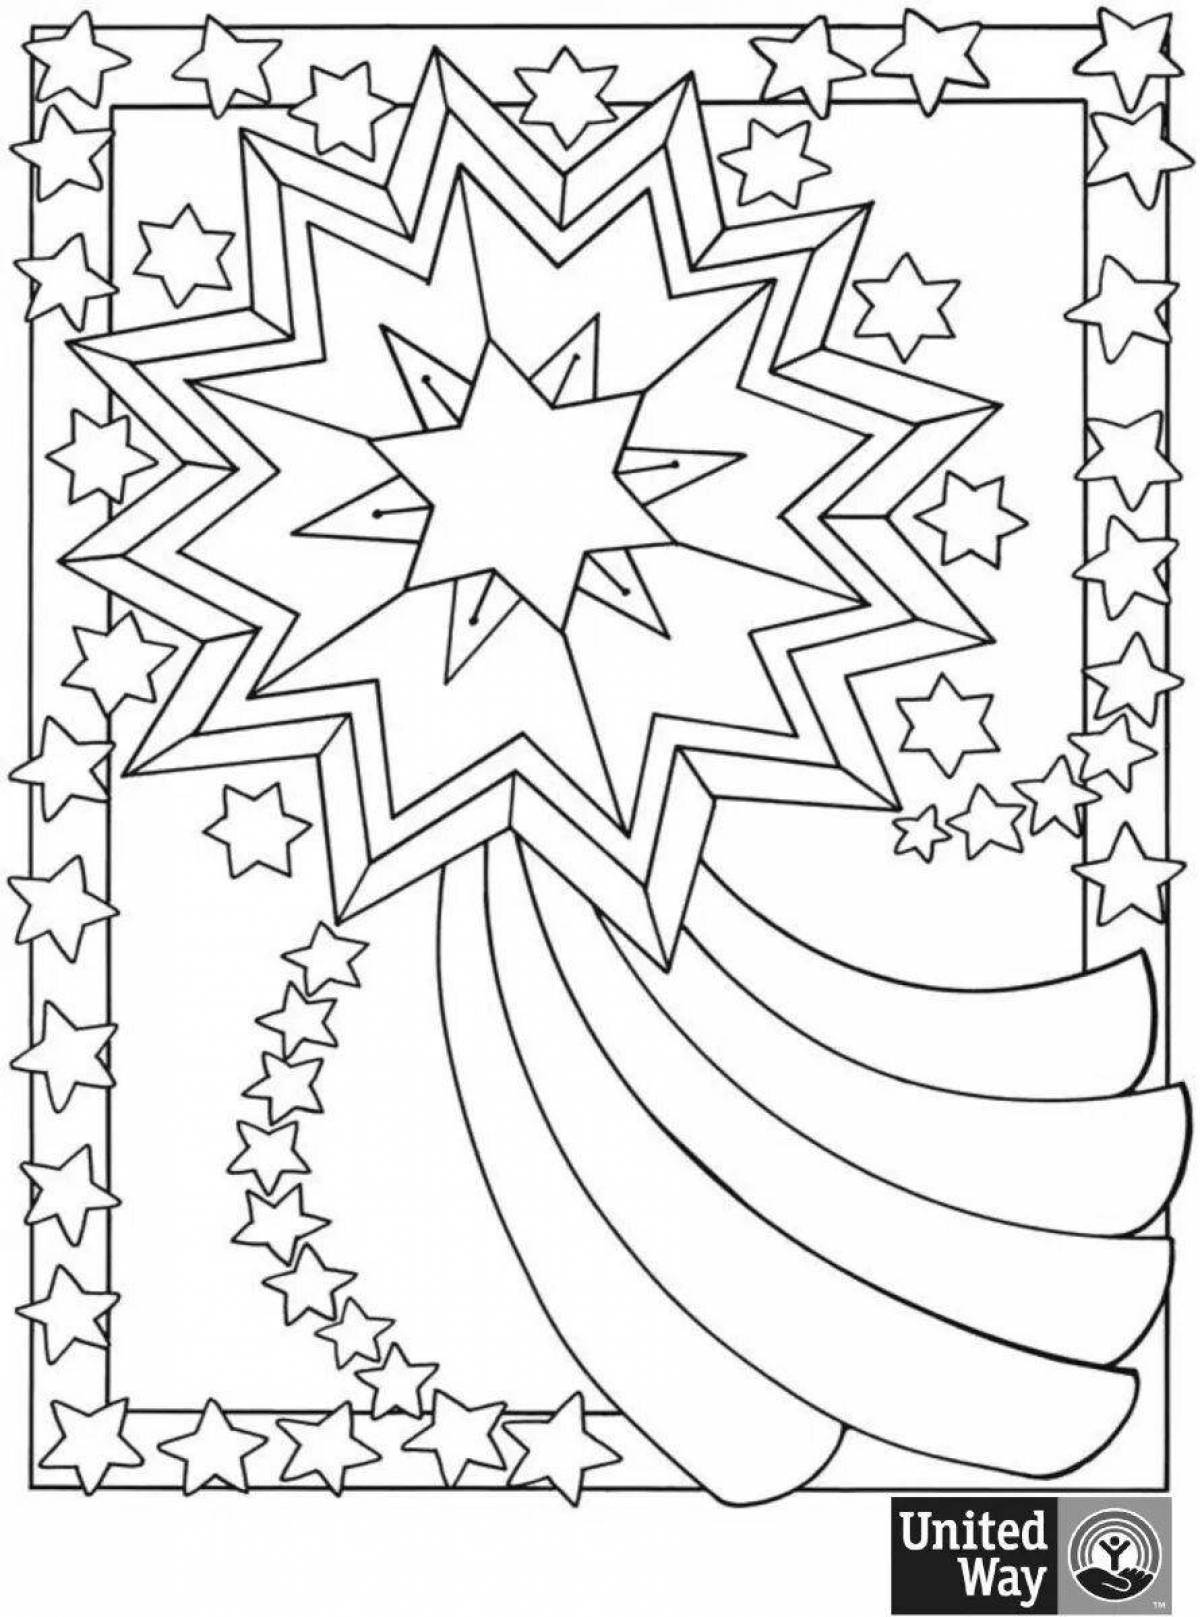 Bright star of bethlehem coloring pages for kids